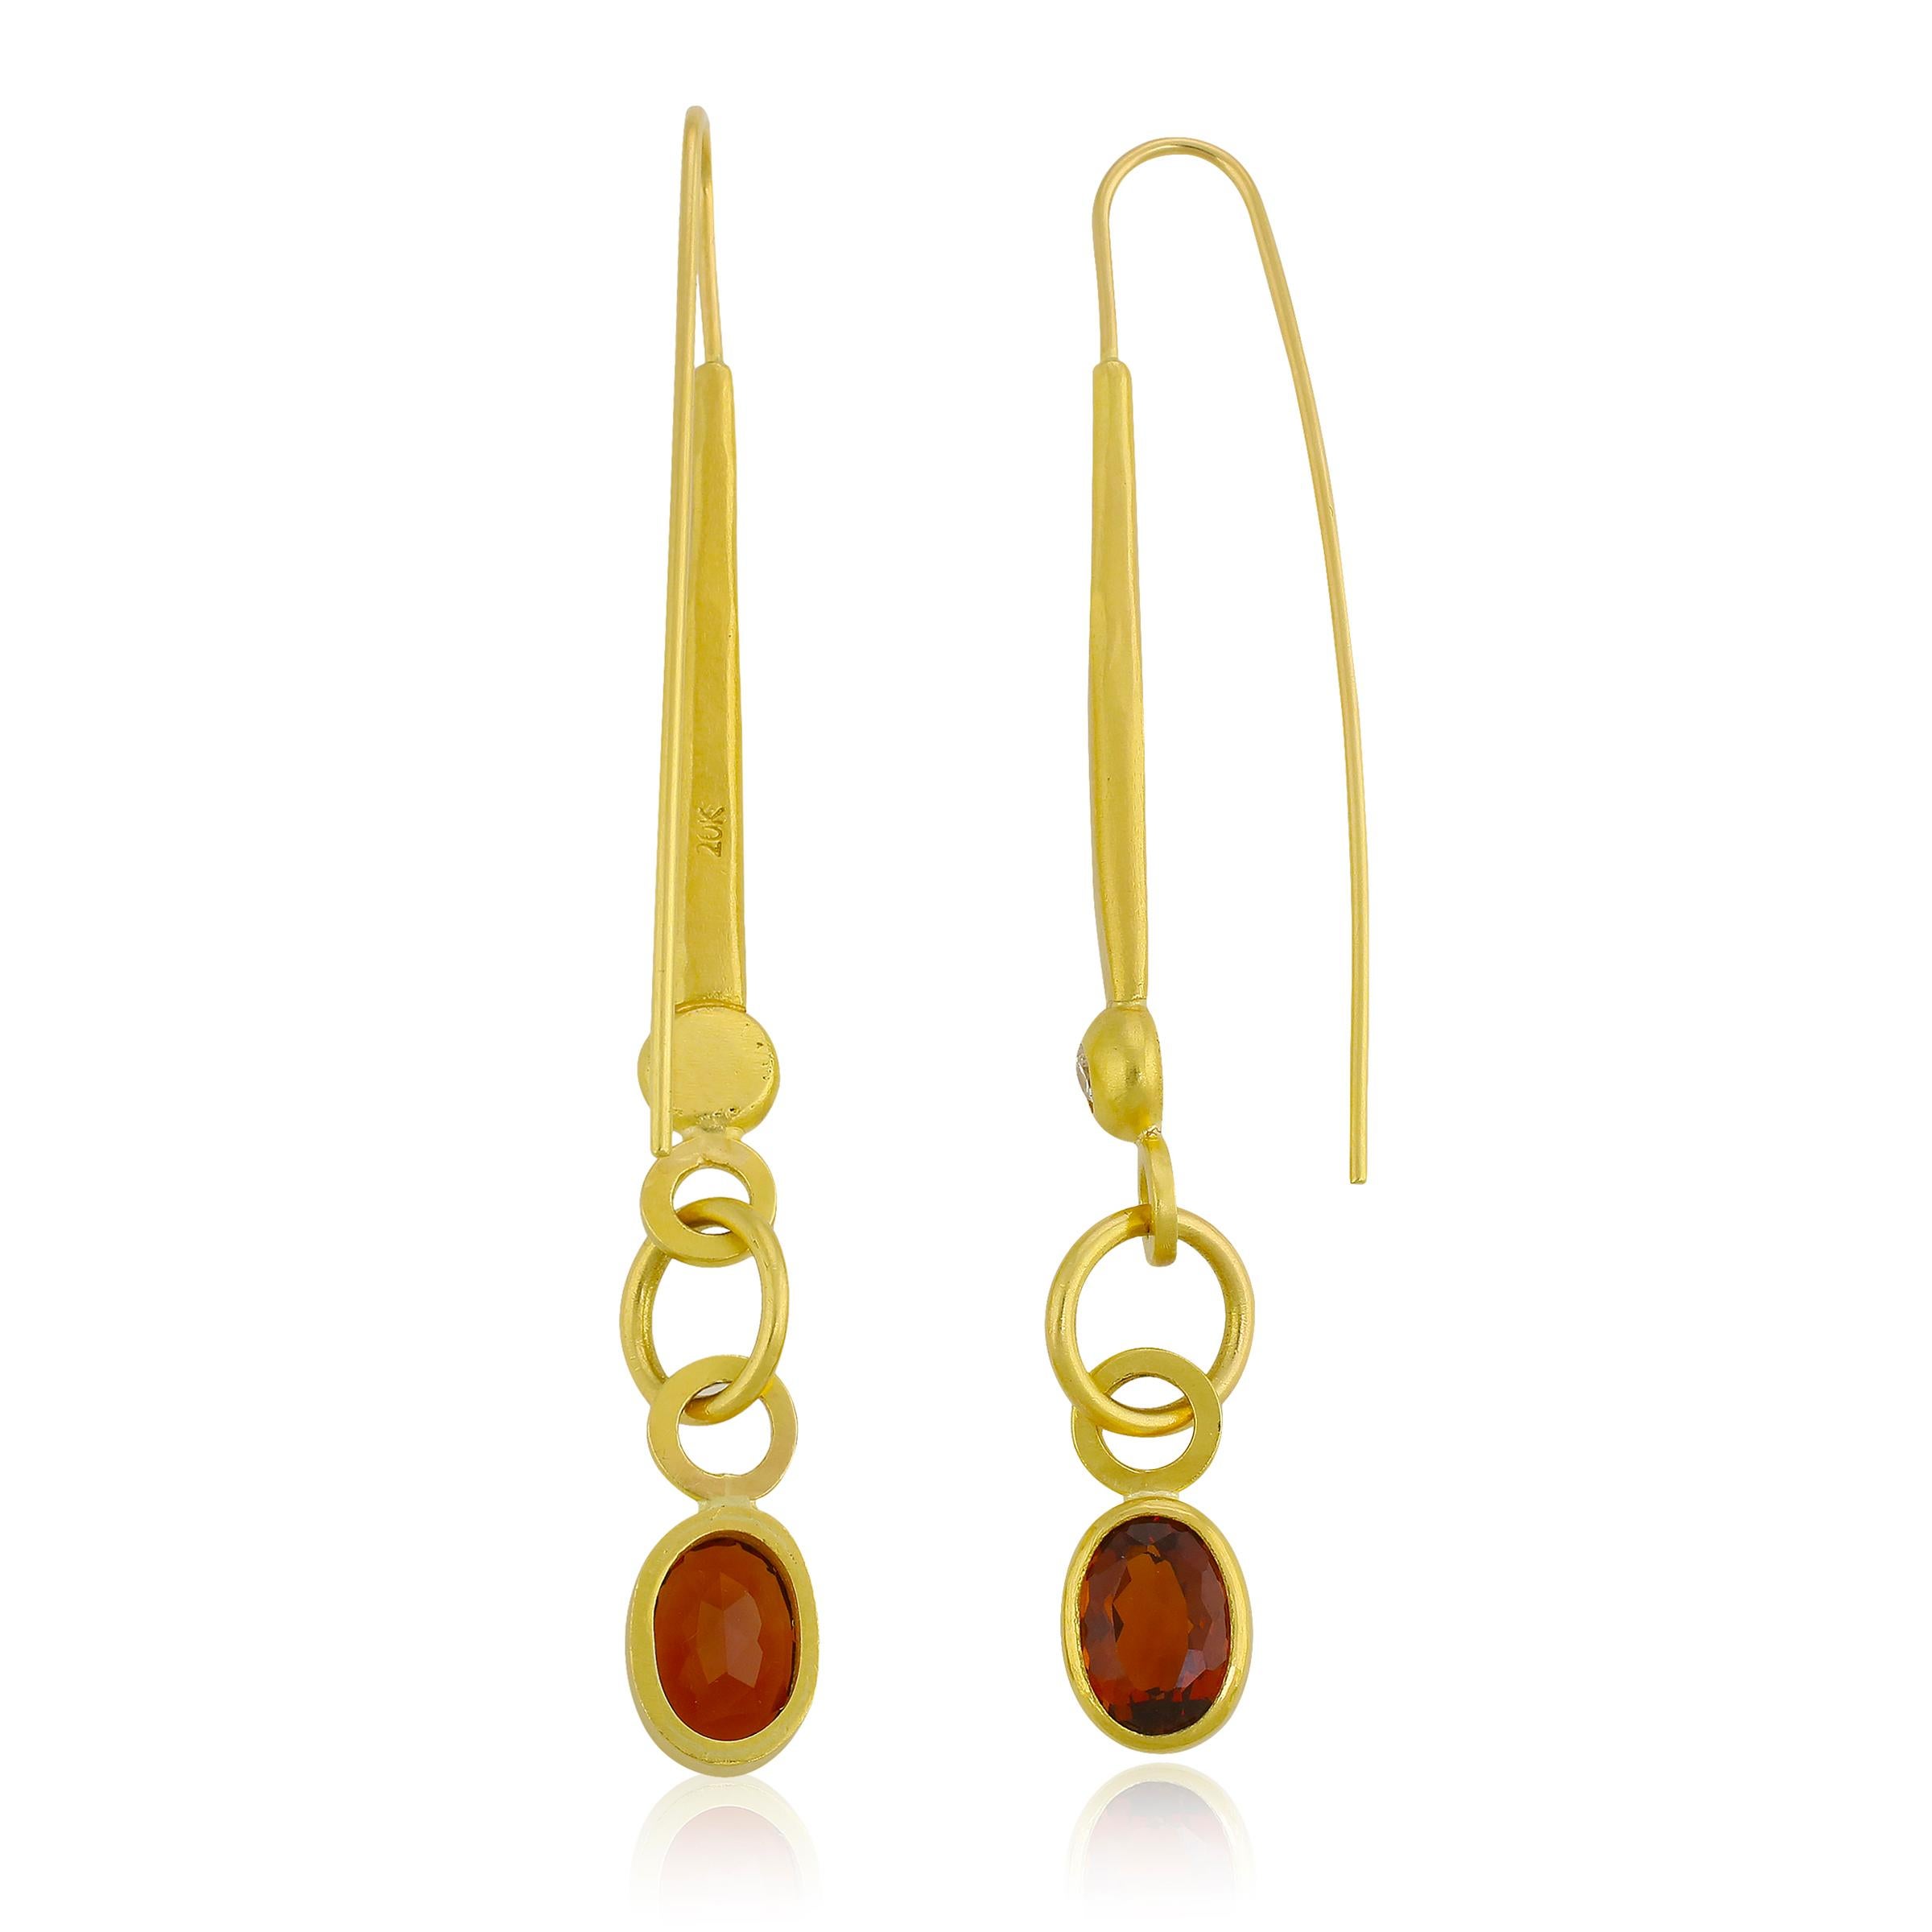 PHILIPPE SPENCER -  4.5 Ct. Total Oval Deep Orange Citrines set in backless Pure 22K Gold, and 1/4 Ct. Total COLORLESS (D-F) Diamonds with Solid 20K Gold Feature One-Of-A-Kind Statement Earrings.  

These Heirloom-Worth Hand-Forged Dangling